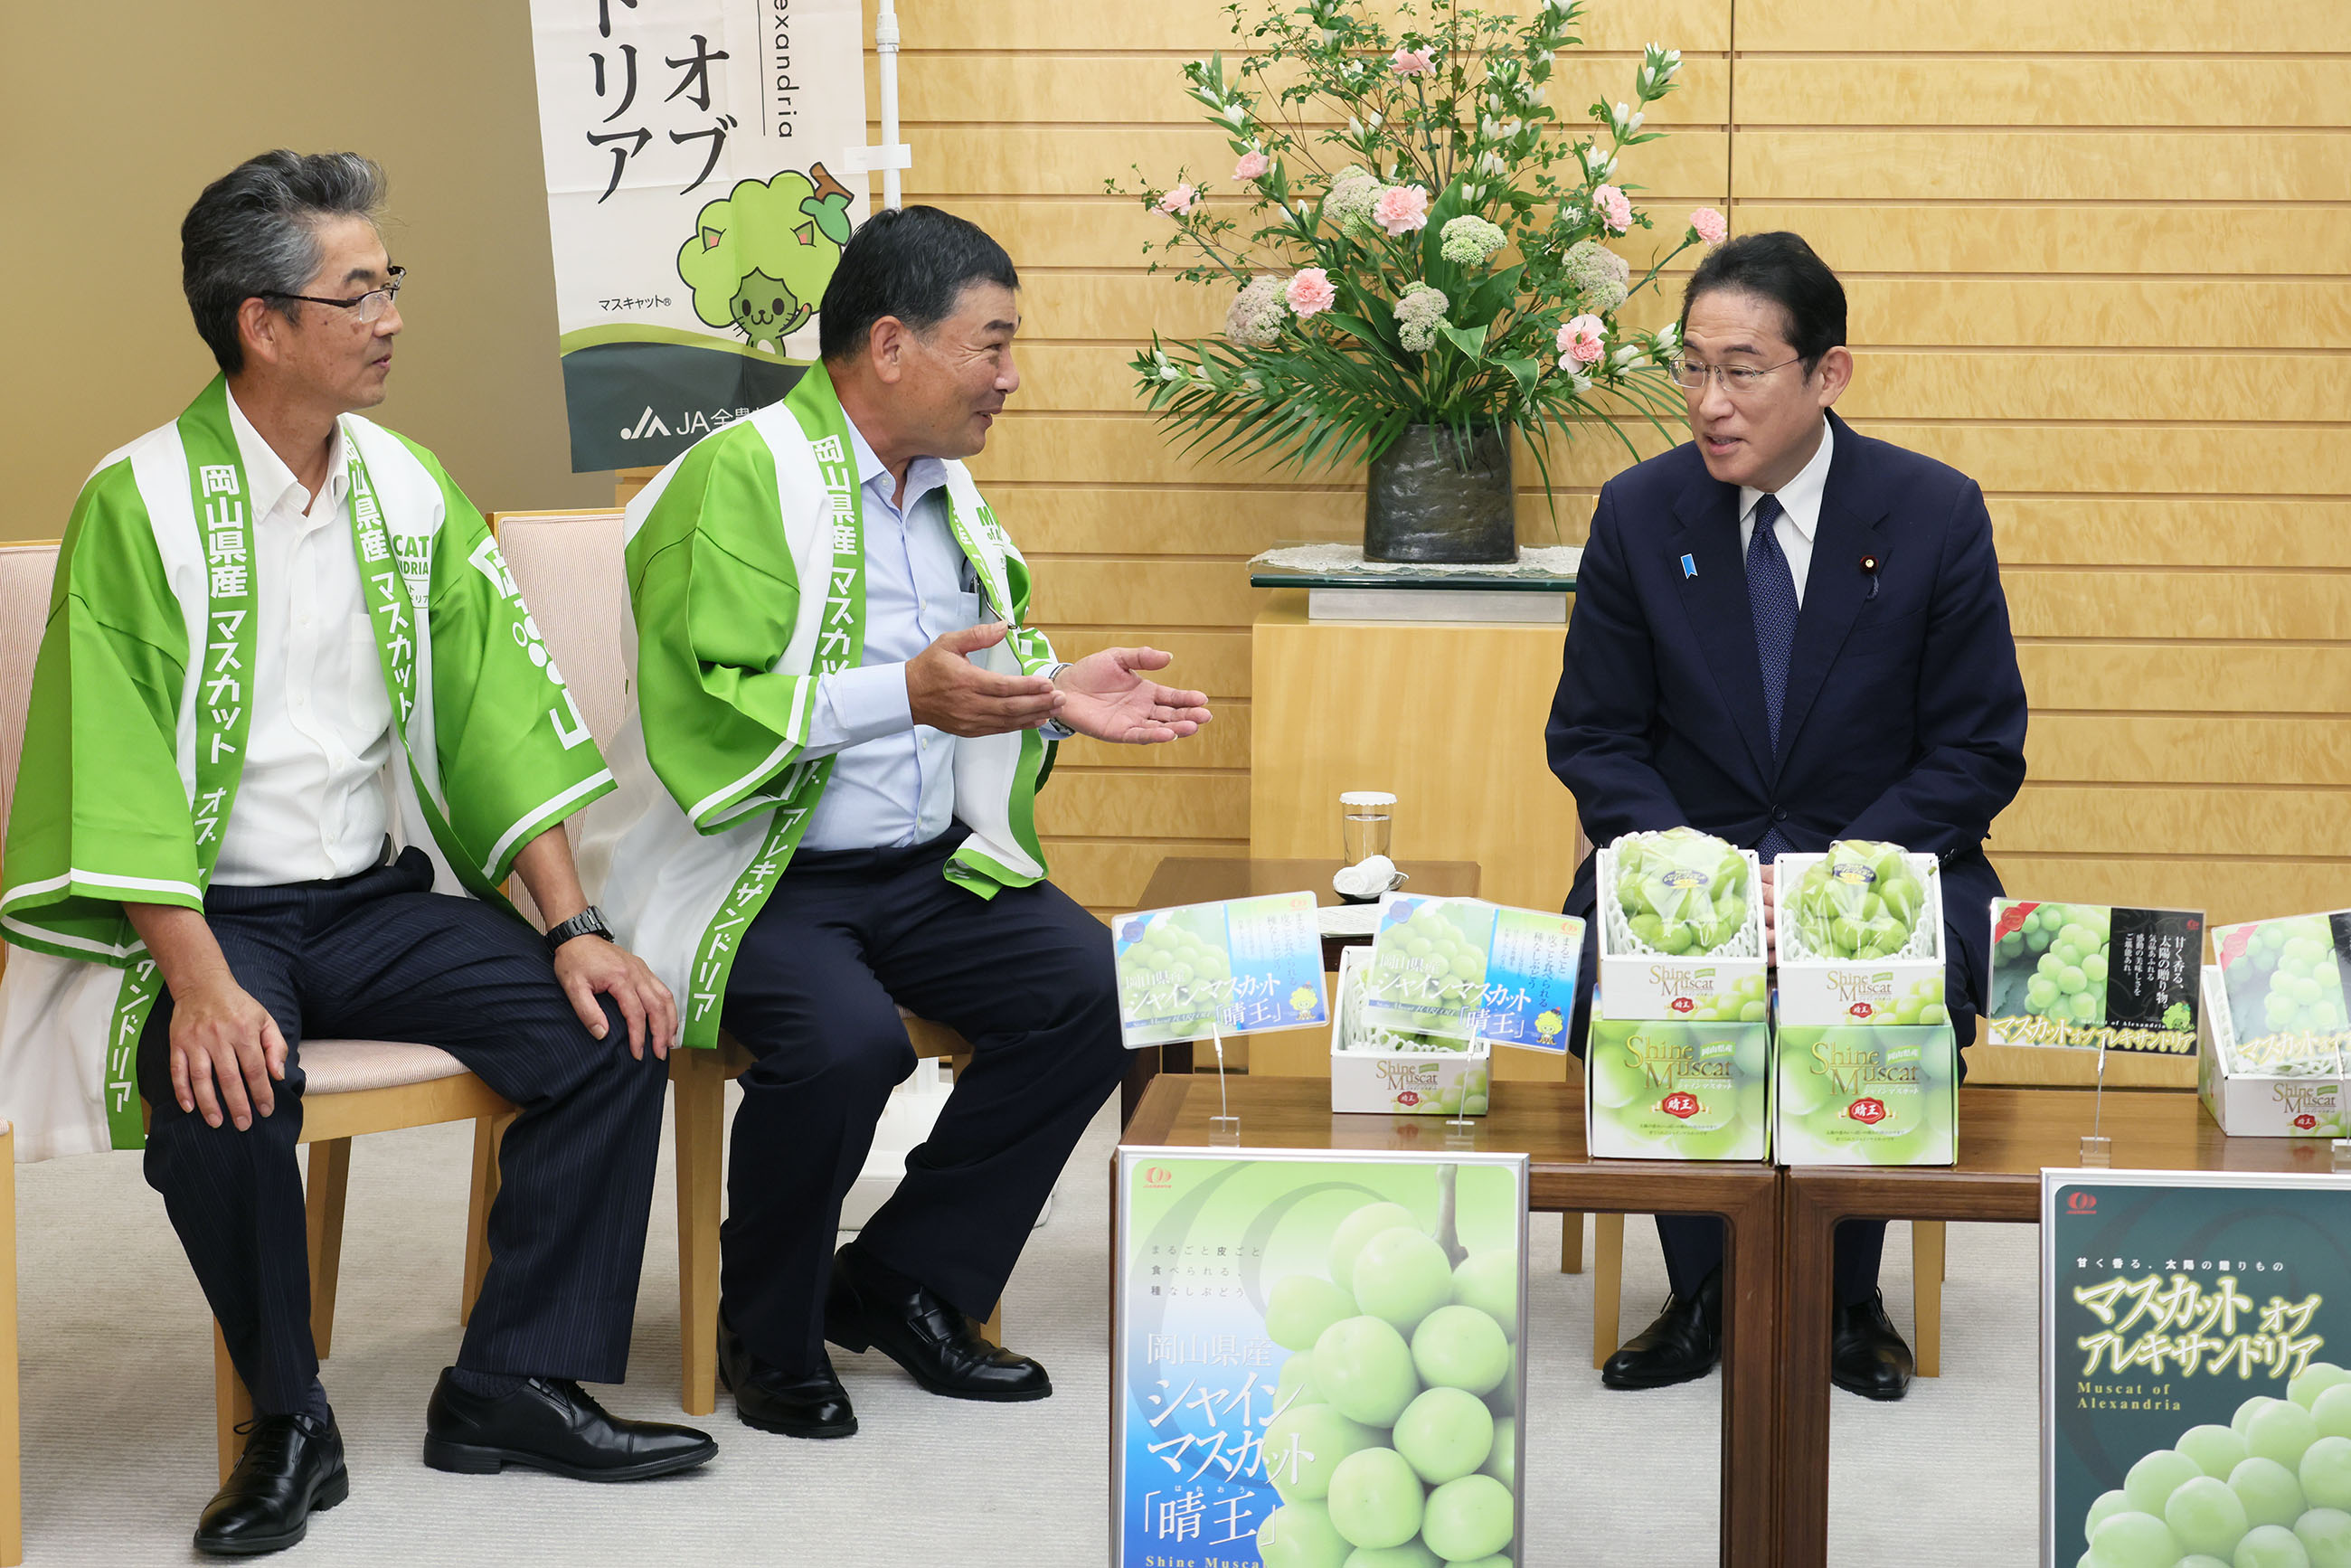 Prime Minister Kishida being presented with Shine Muscat grapes (2)